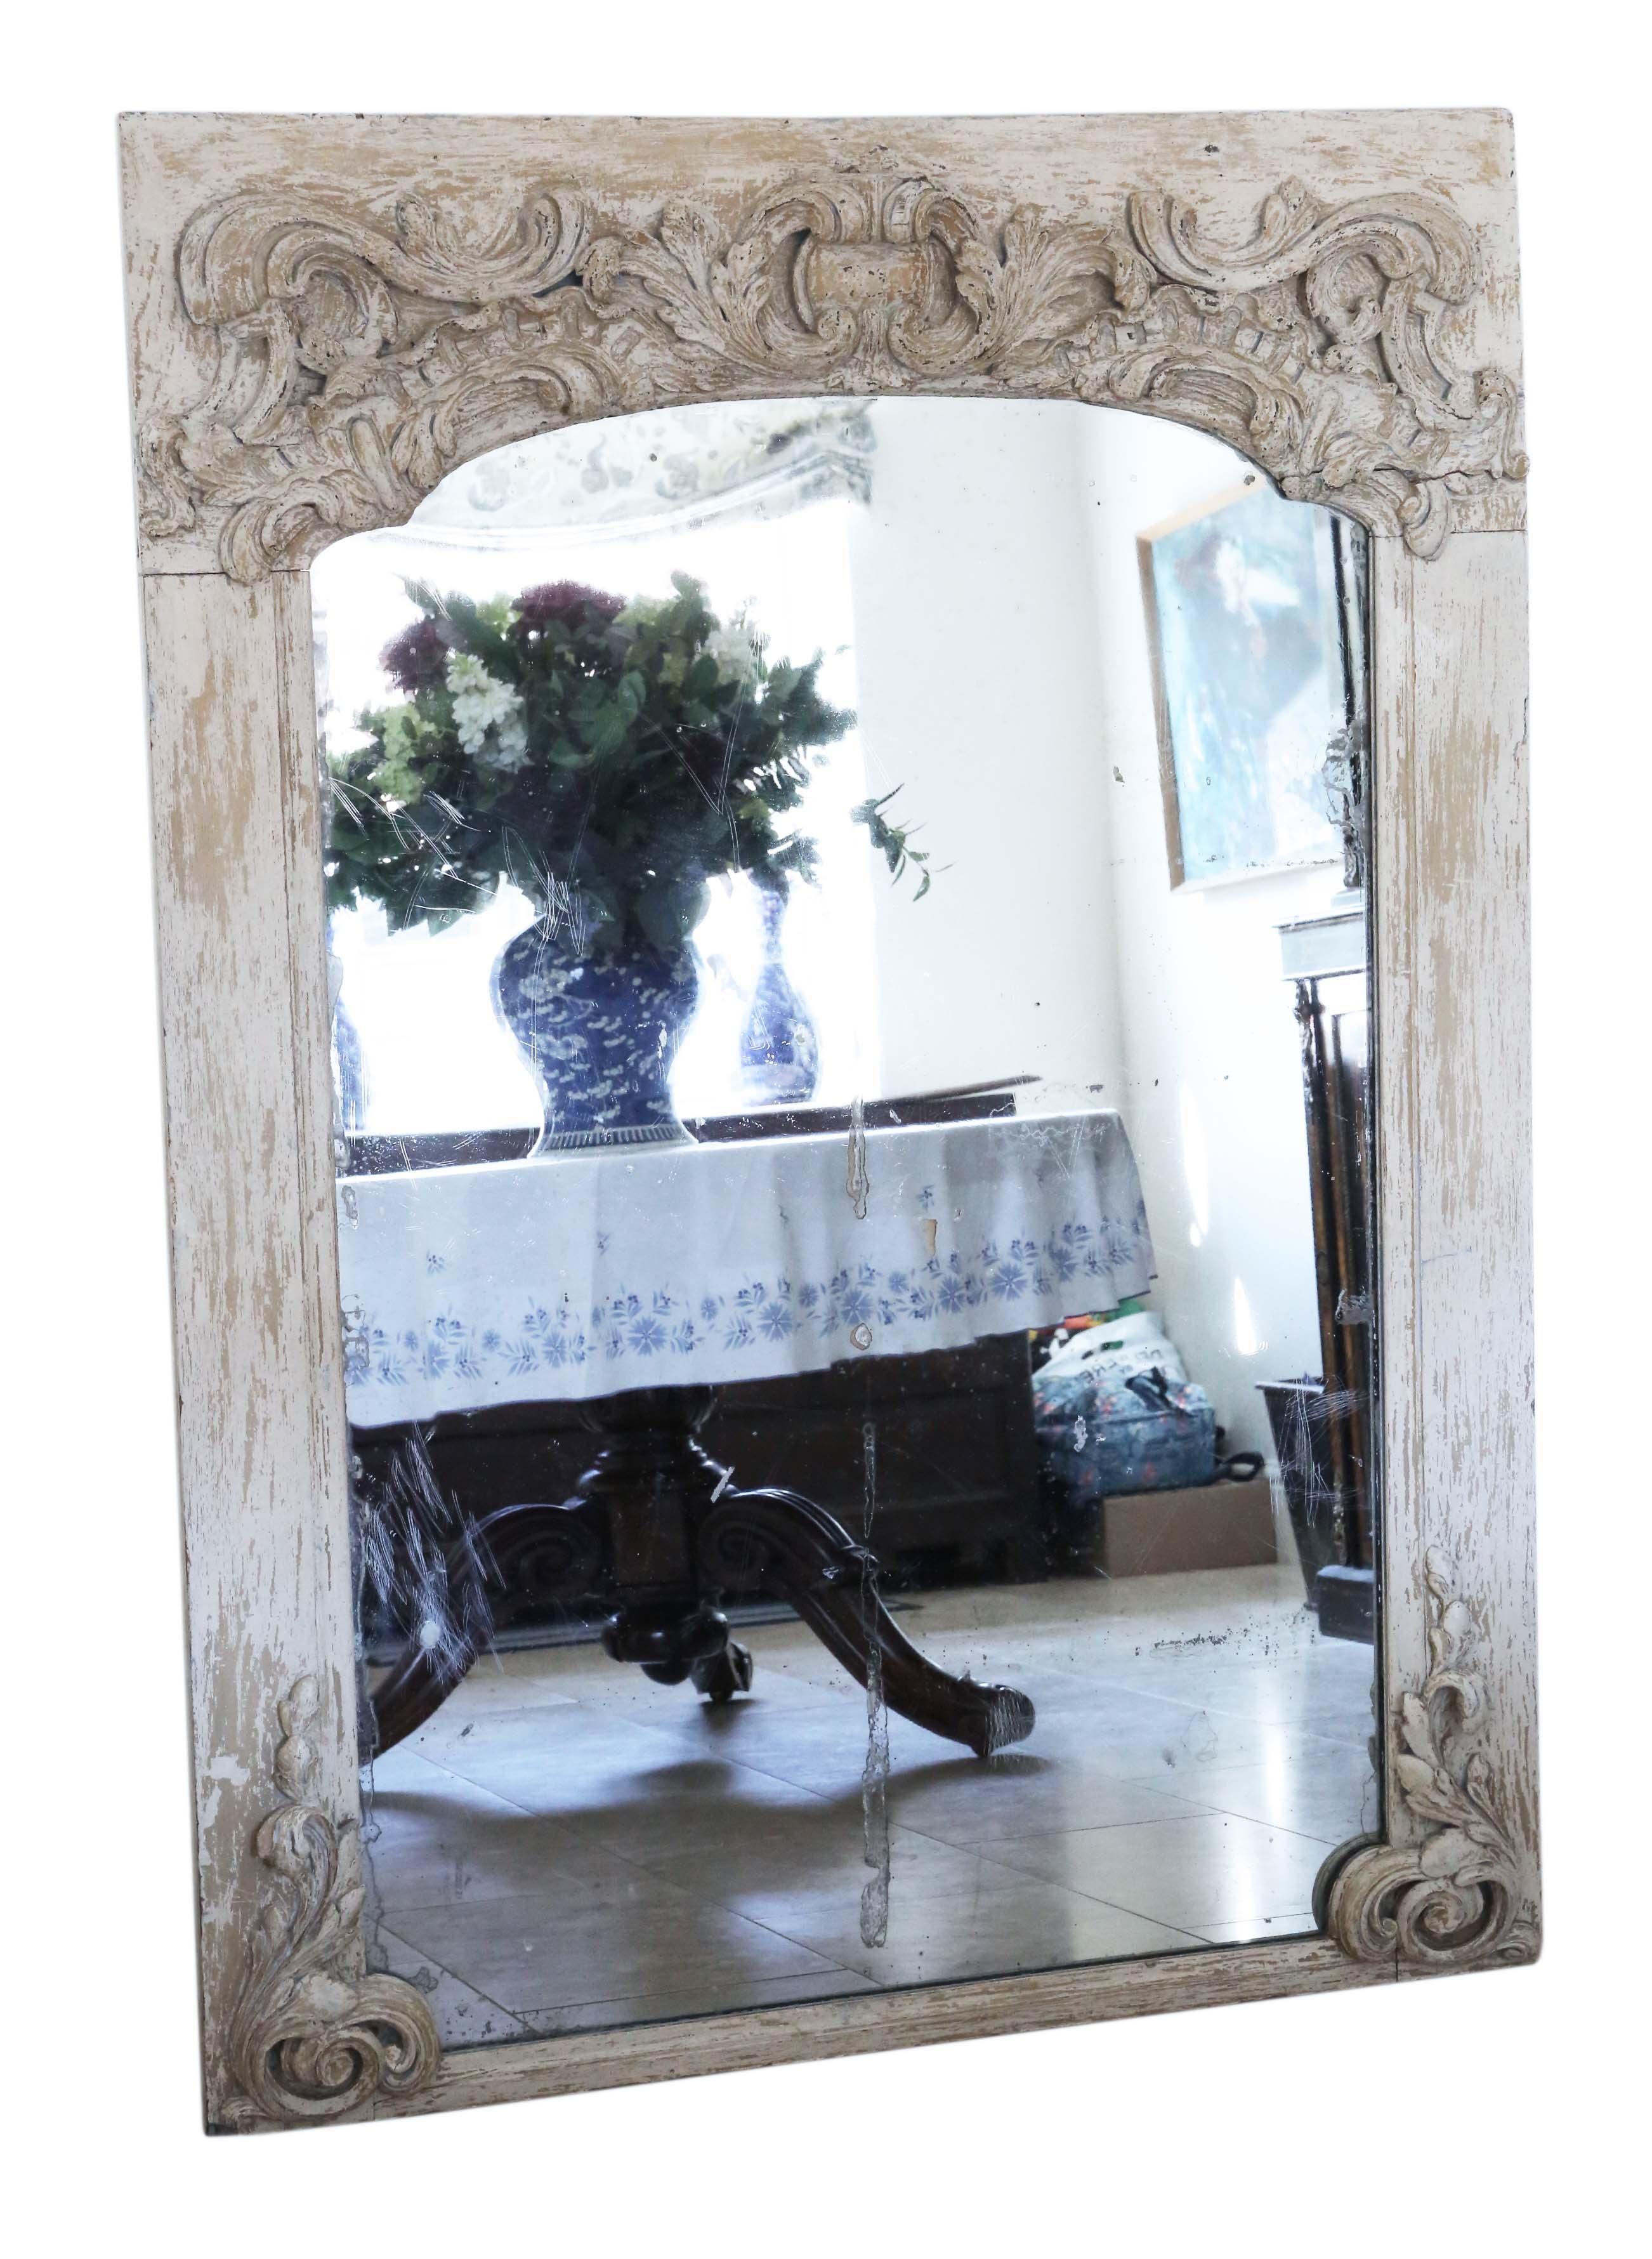 Antique large 18/19th century C1800 large quality painted chateau overmantle or wall mirror. Very old oak frame and mirrored glass.

An impressive find, that would look amazing in the right location. No loose joints or woodworm.

Original